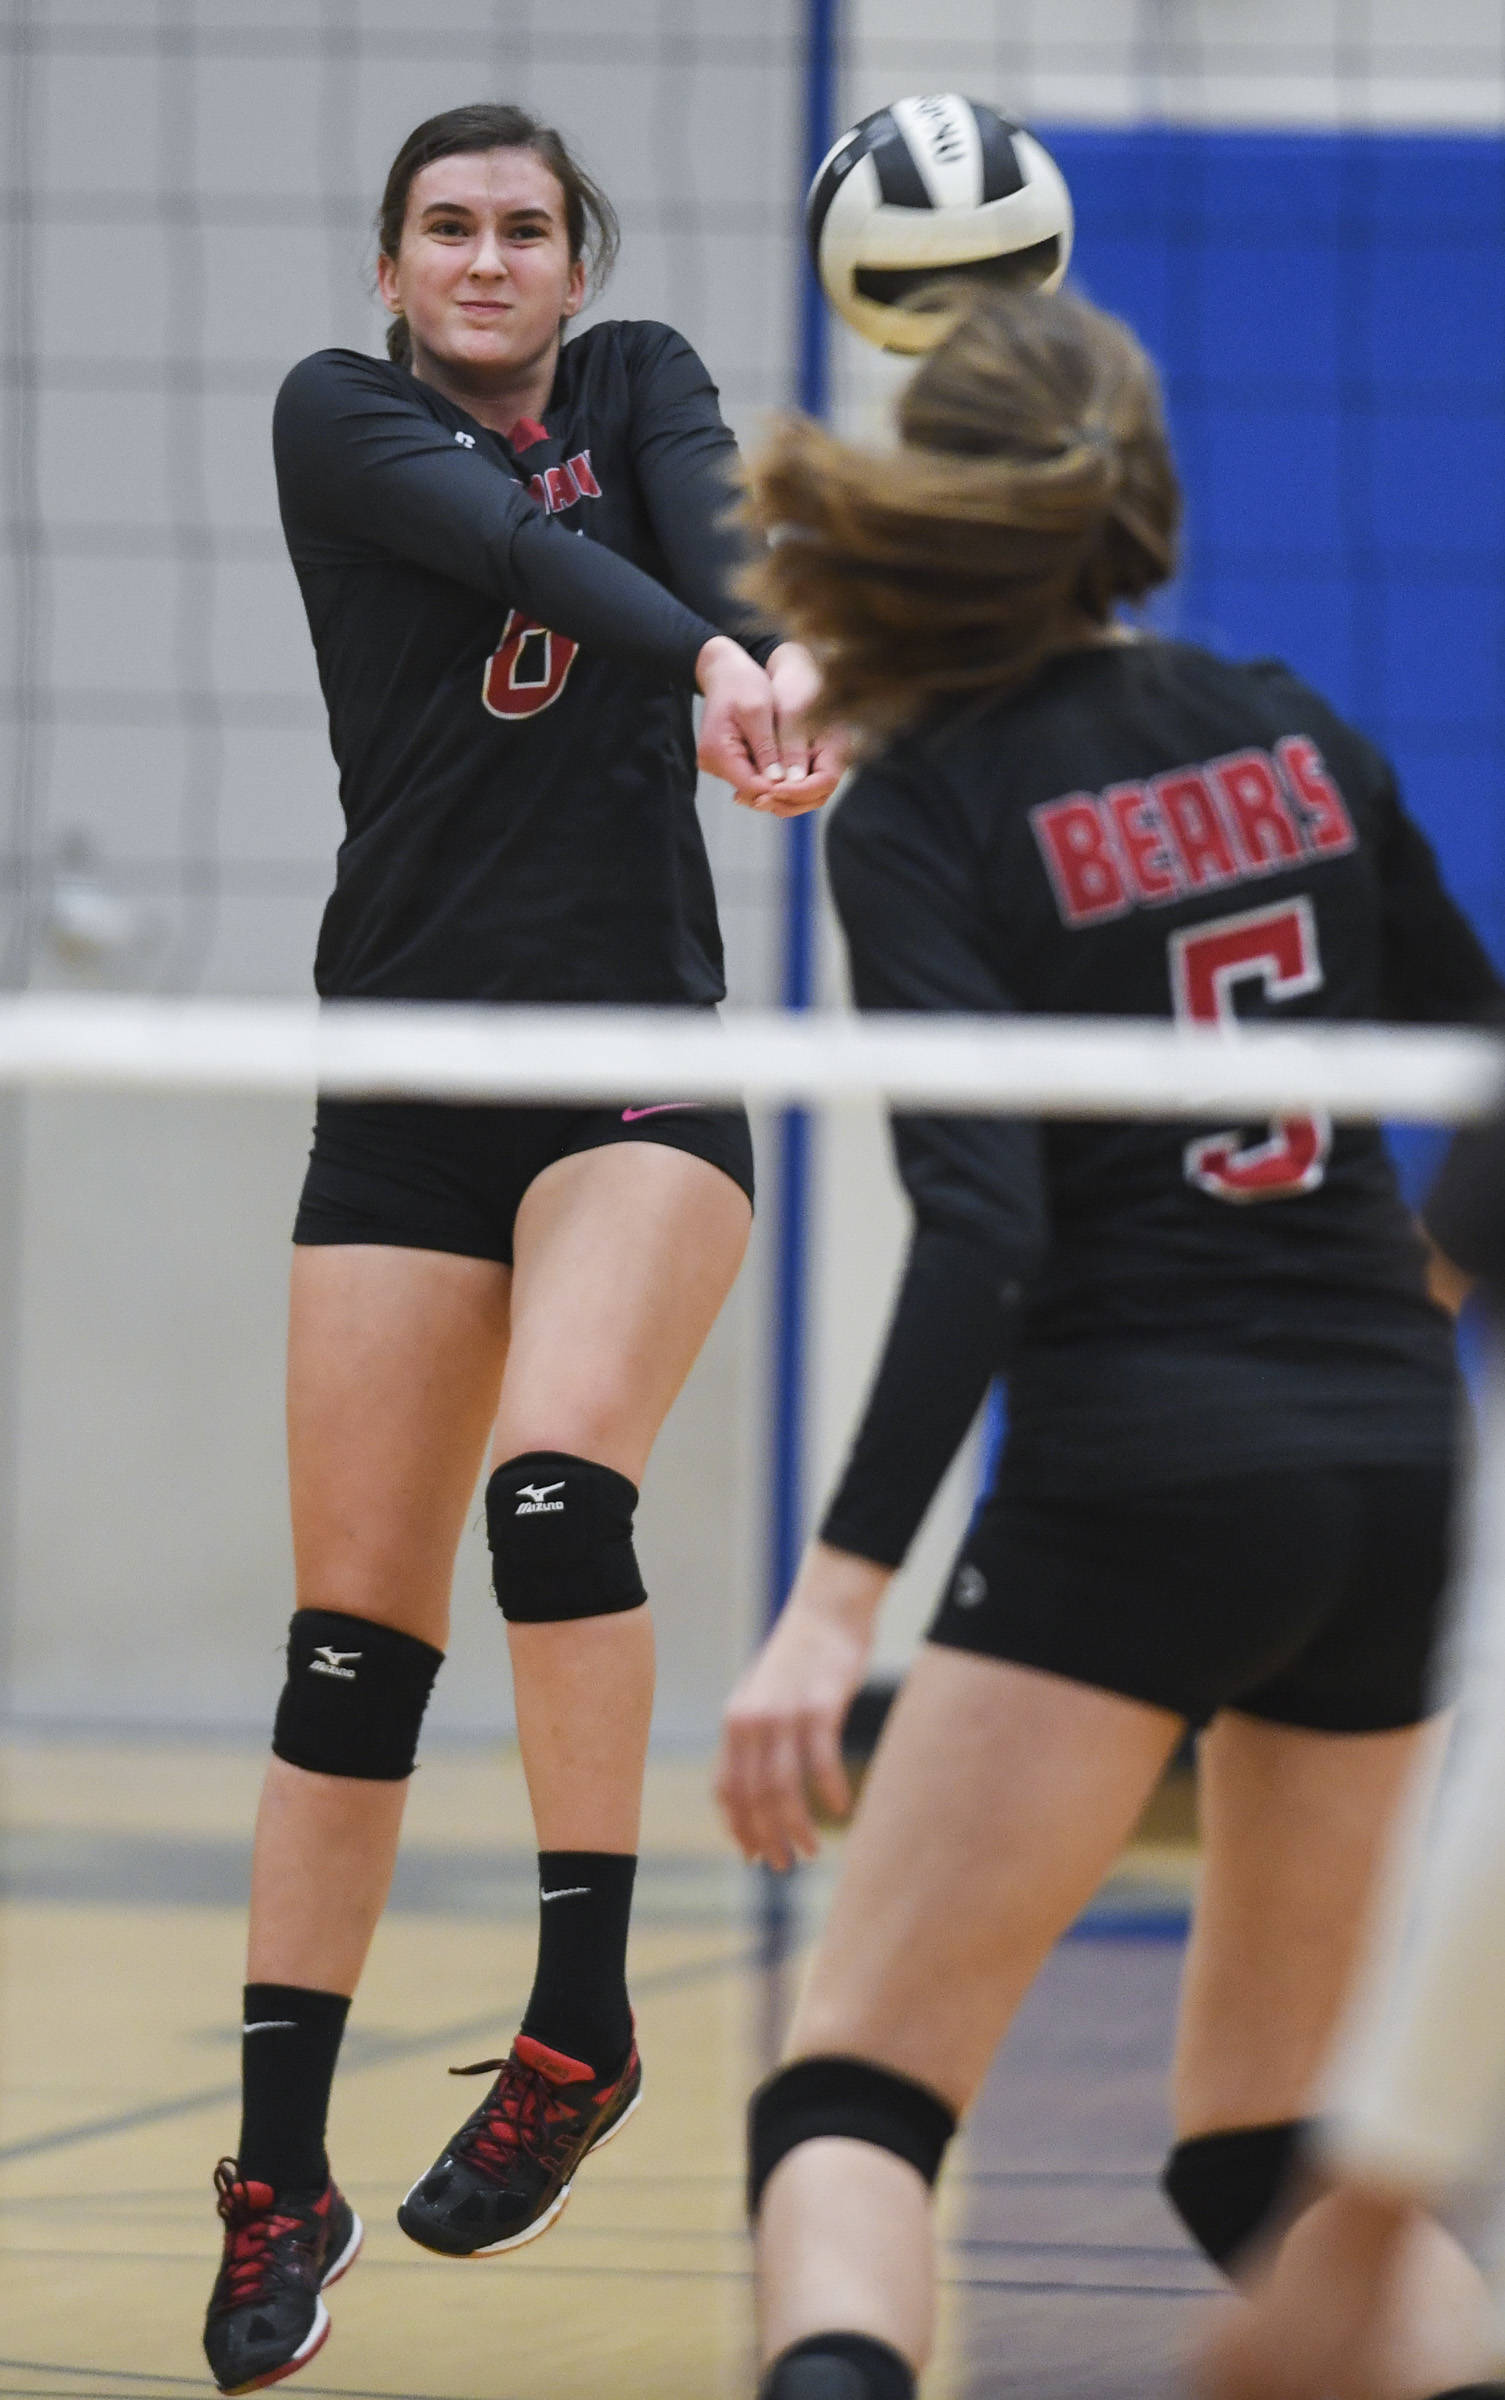 Juneau-Douglas’ bumps the ball up against Thunder Mountain during the Region V Volleyball Tournament at Thunder Mountain High School on Friday, Nov. 8, 2019. JDHS won 25-22, 26-24, 25-20. (Michael Penn | Juneau Empire)